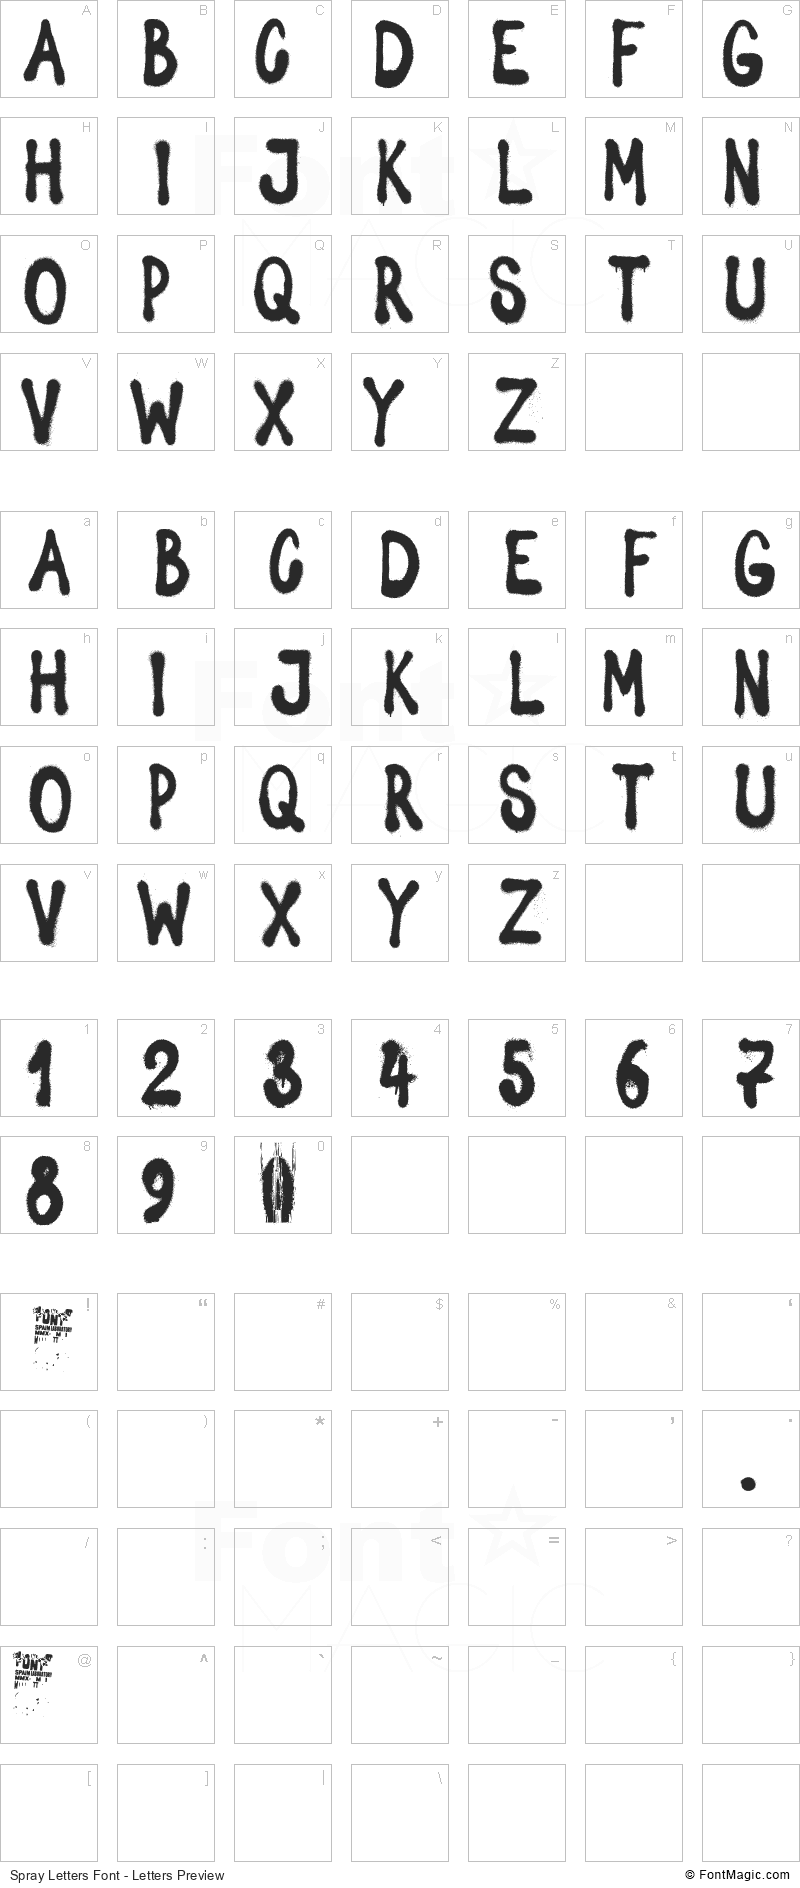 Spray Letters Font - All Latters Preview Chart